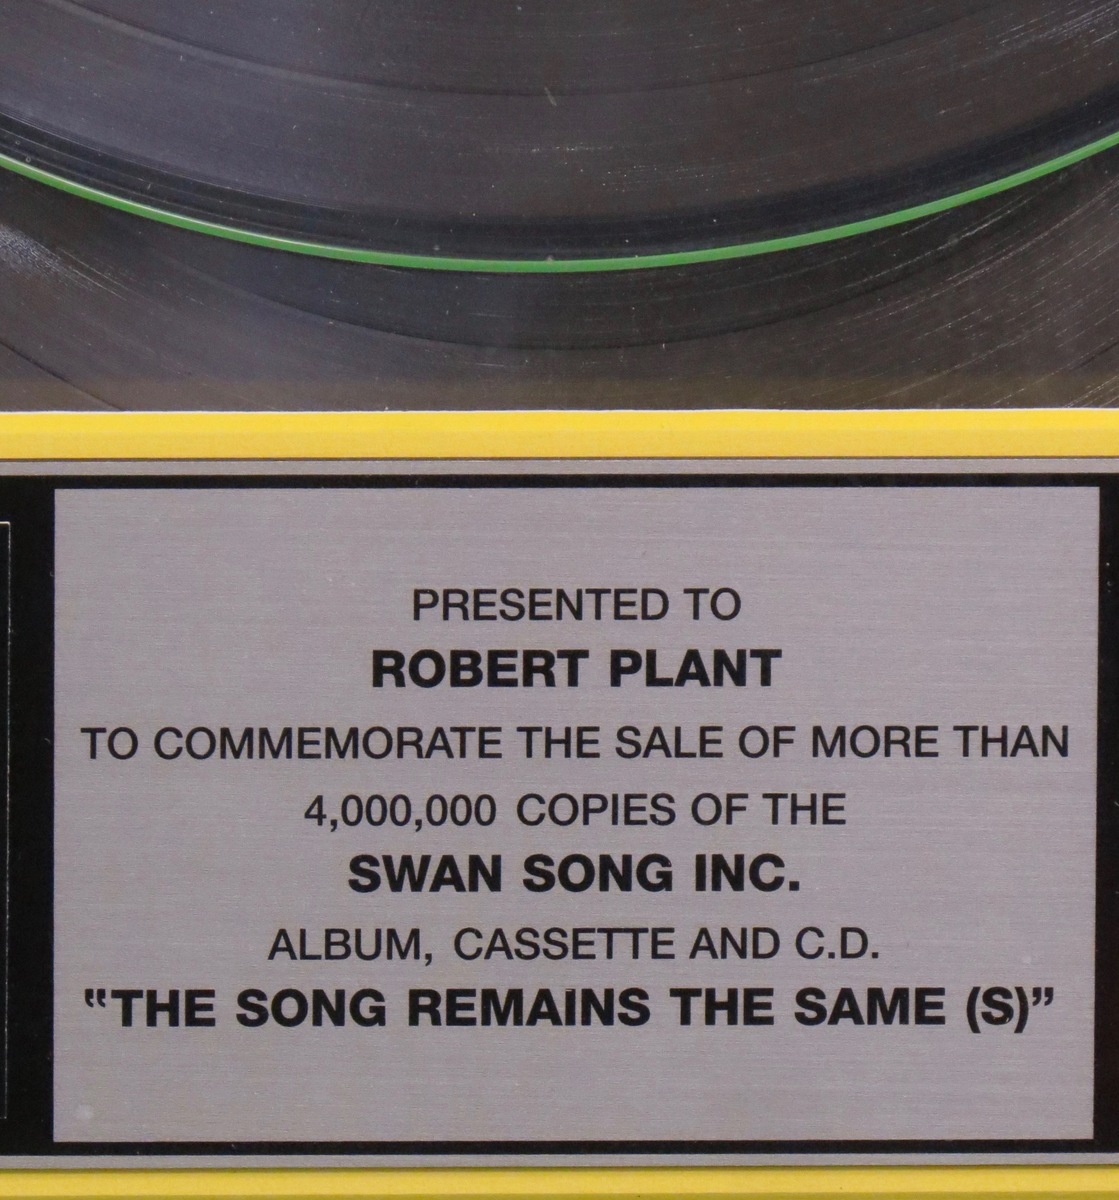 The Song Remains The Same RIAA Platinum Award Presented To Robert Plant